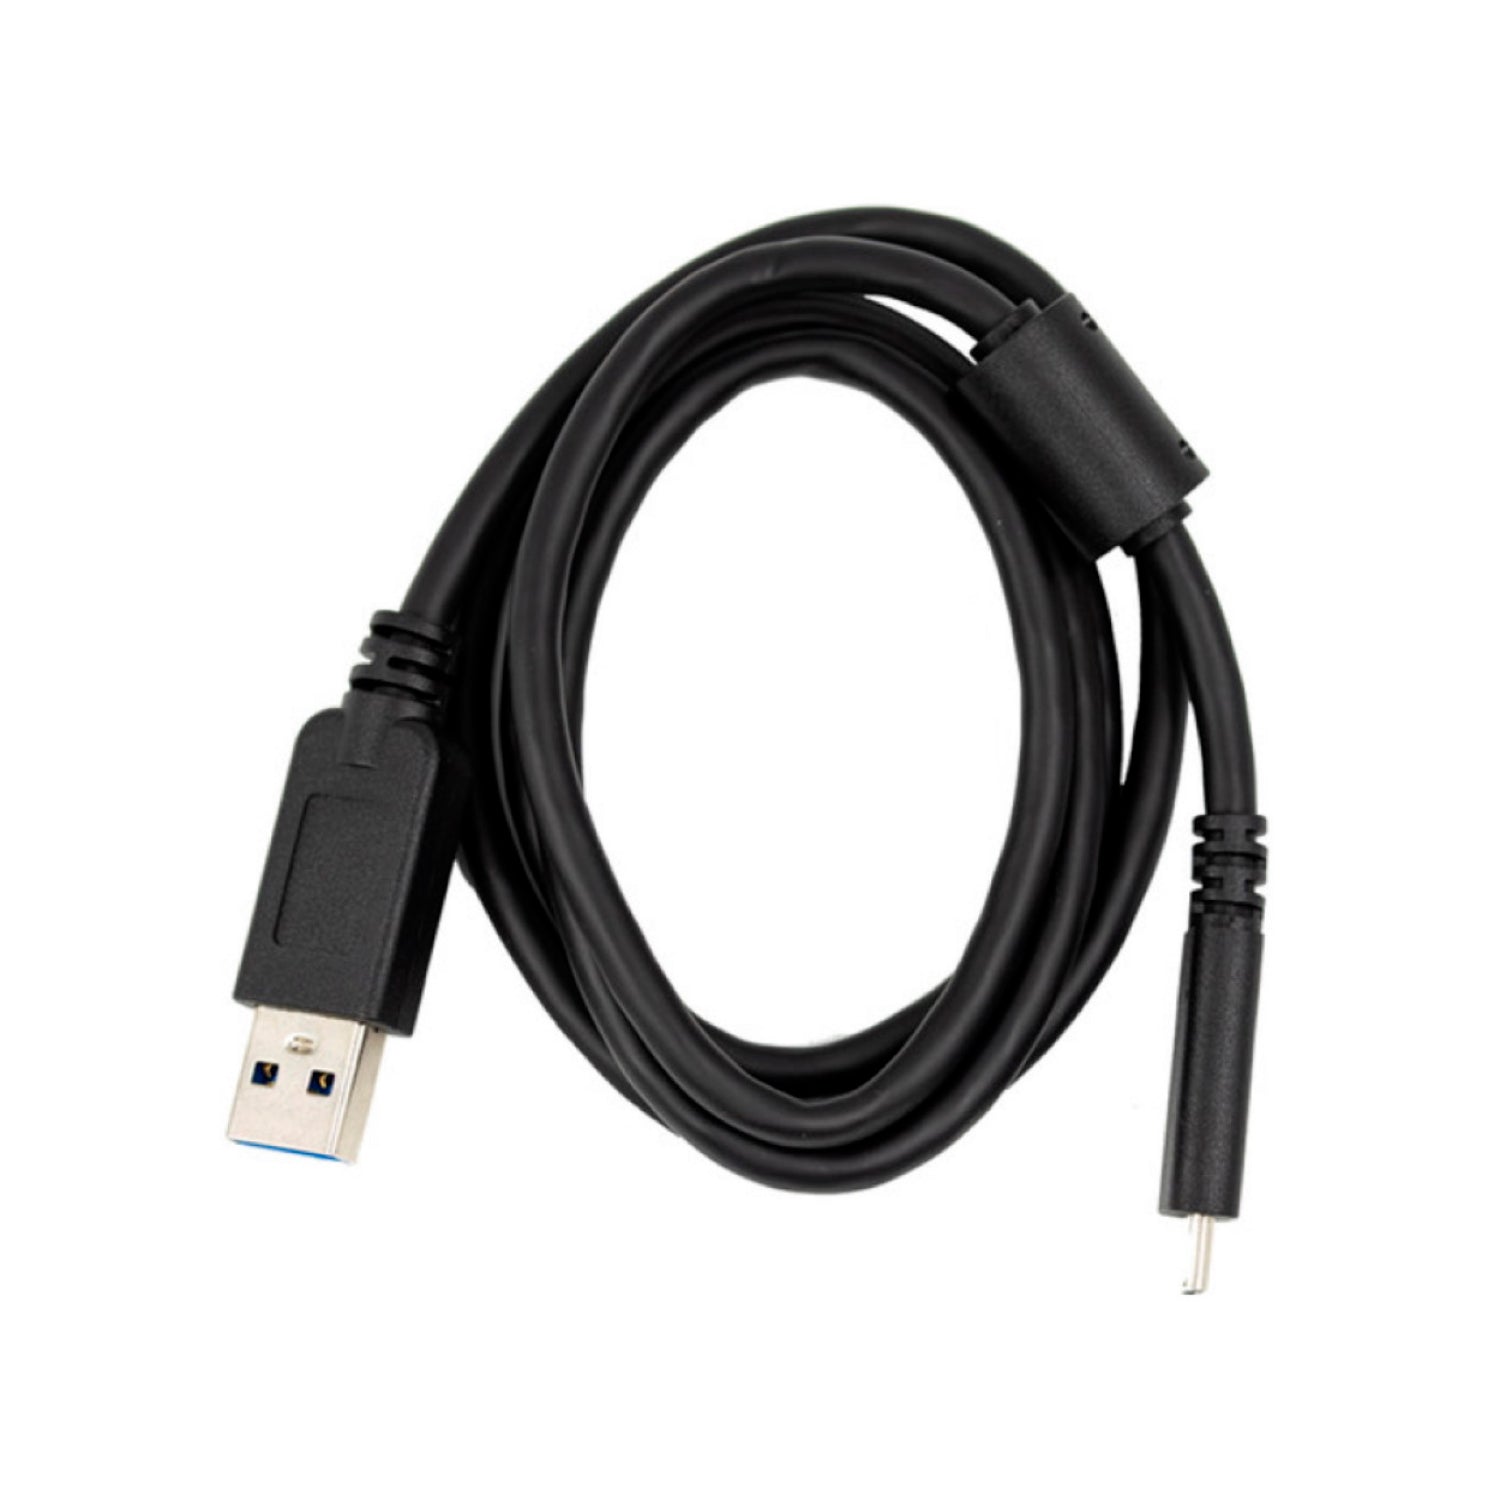 USB Cable SUC-11 (Type-A to Type-C) for fp Mirrorless Camera